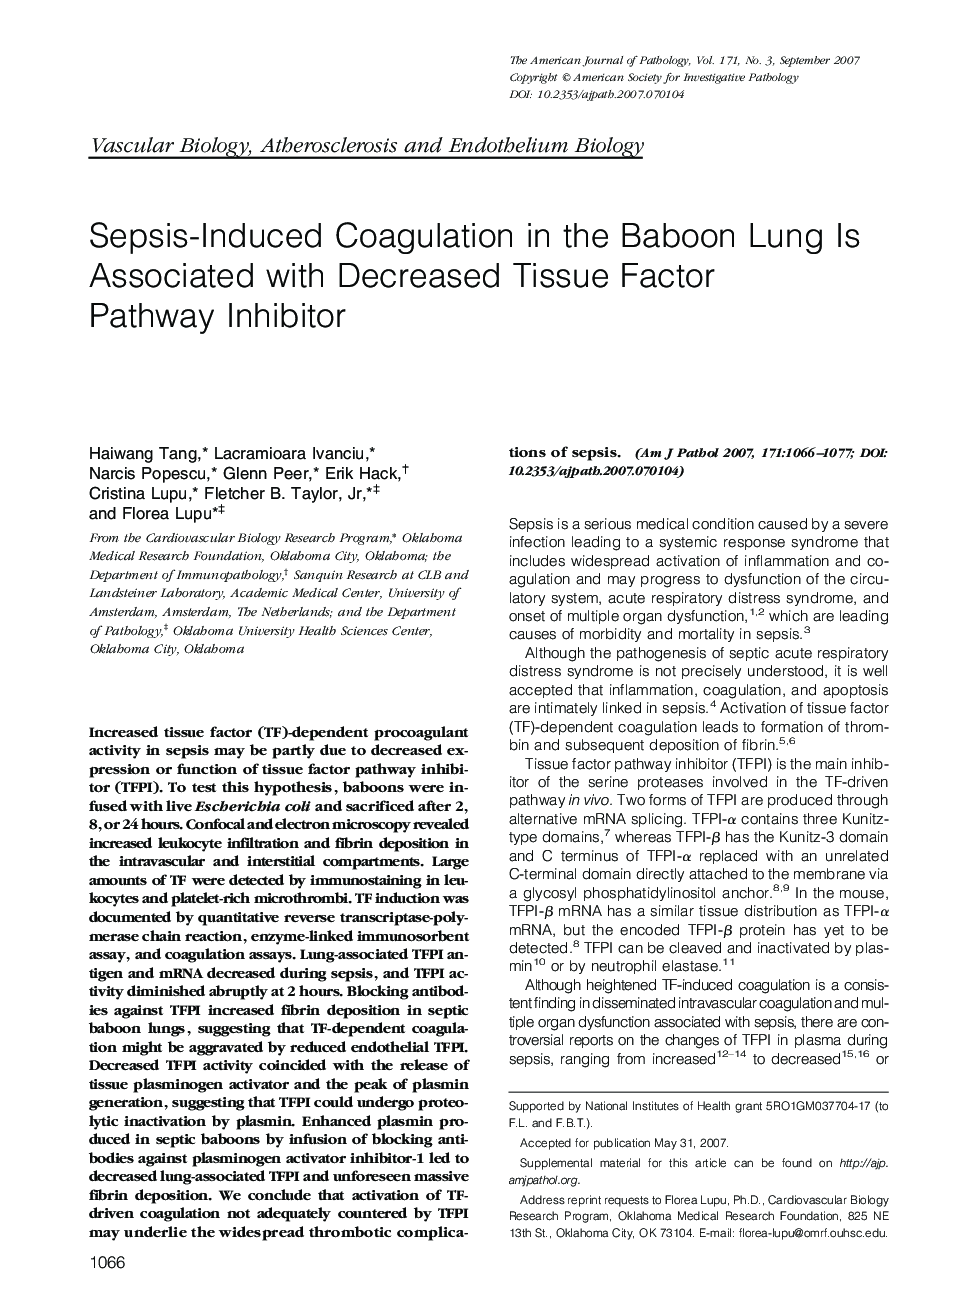 Sepsis-Induced Coagulation in the Baboon Lung Is Associated with Decreased Tissue Factor Pathway Inhibitor